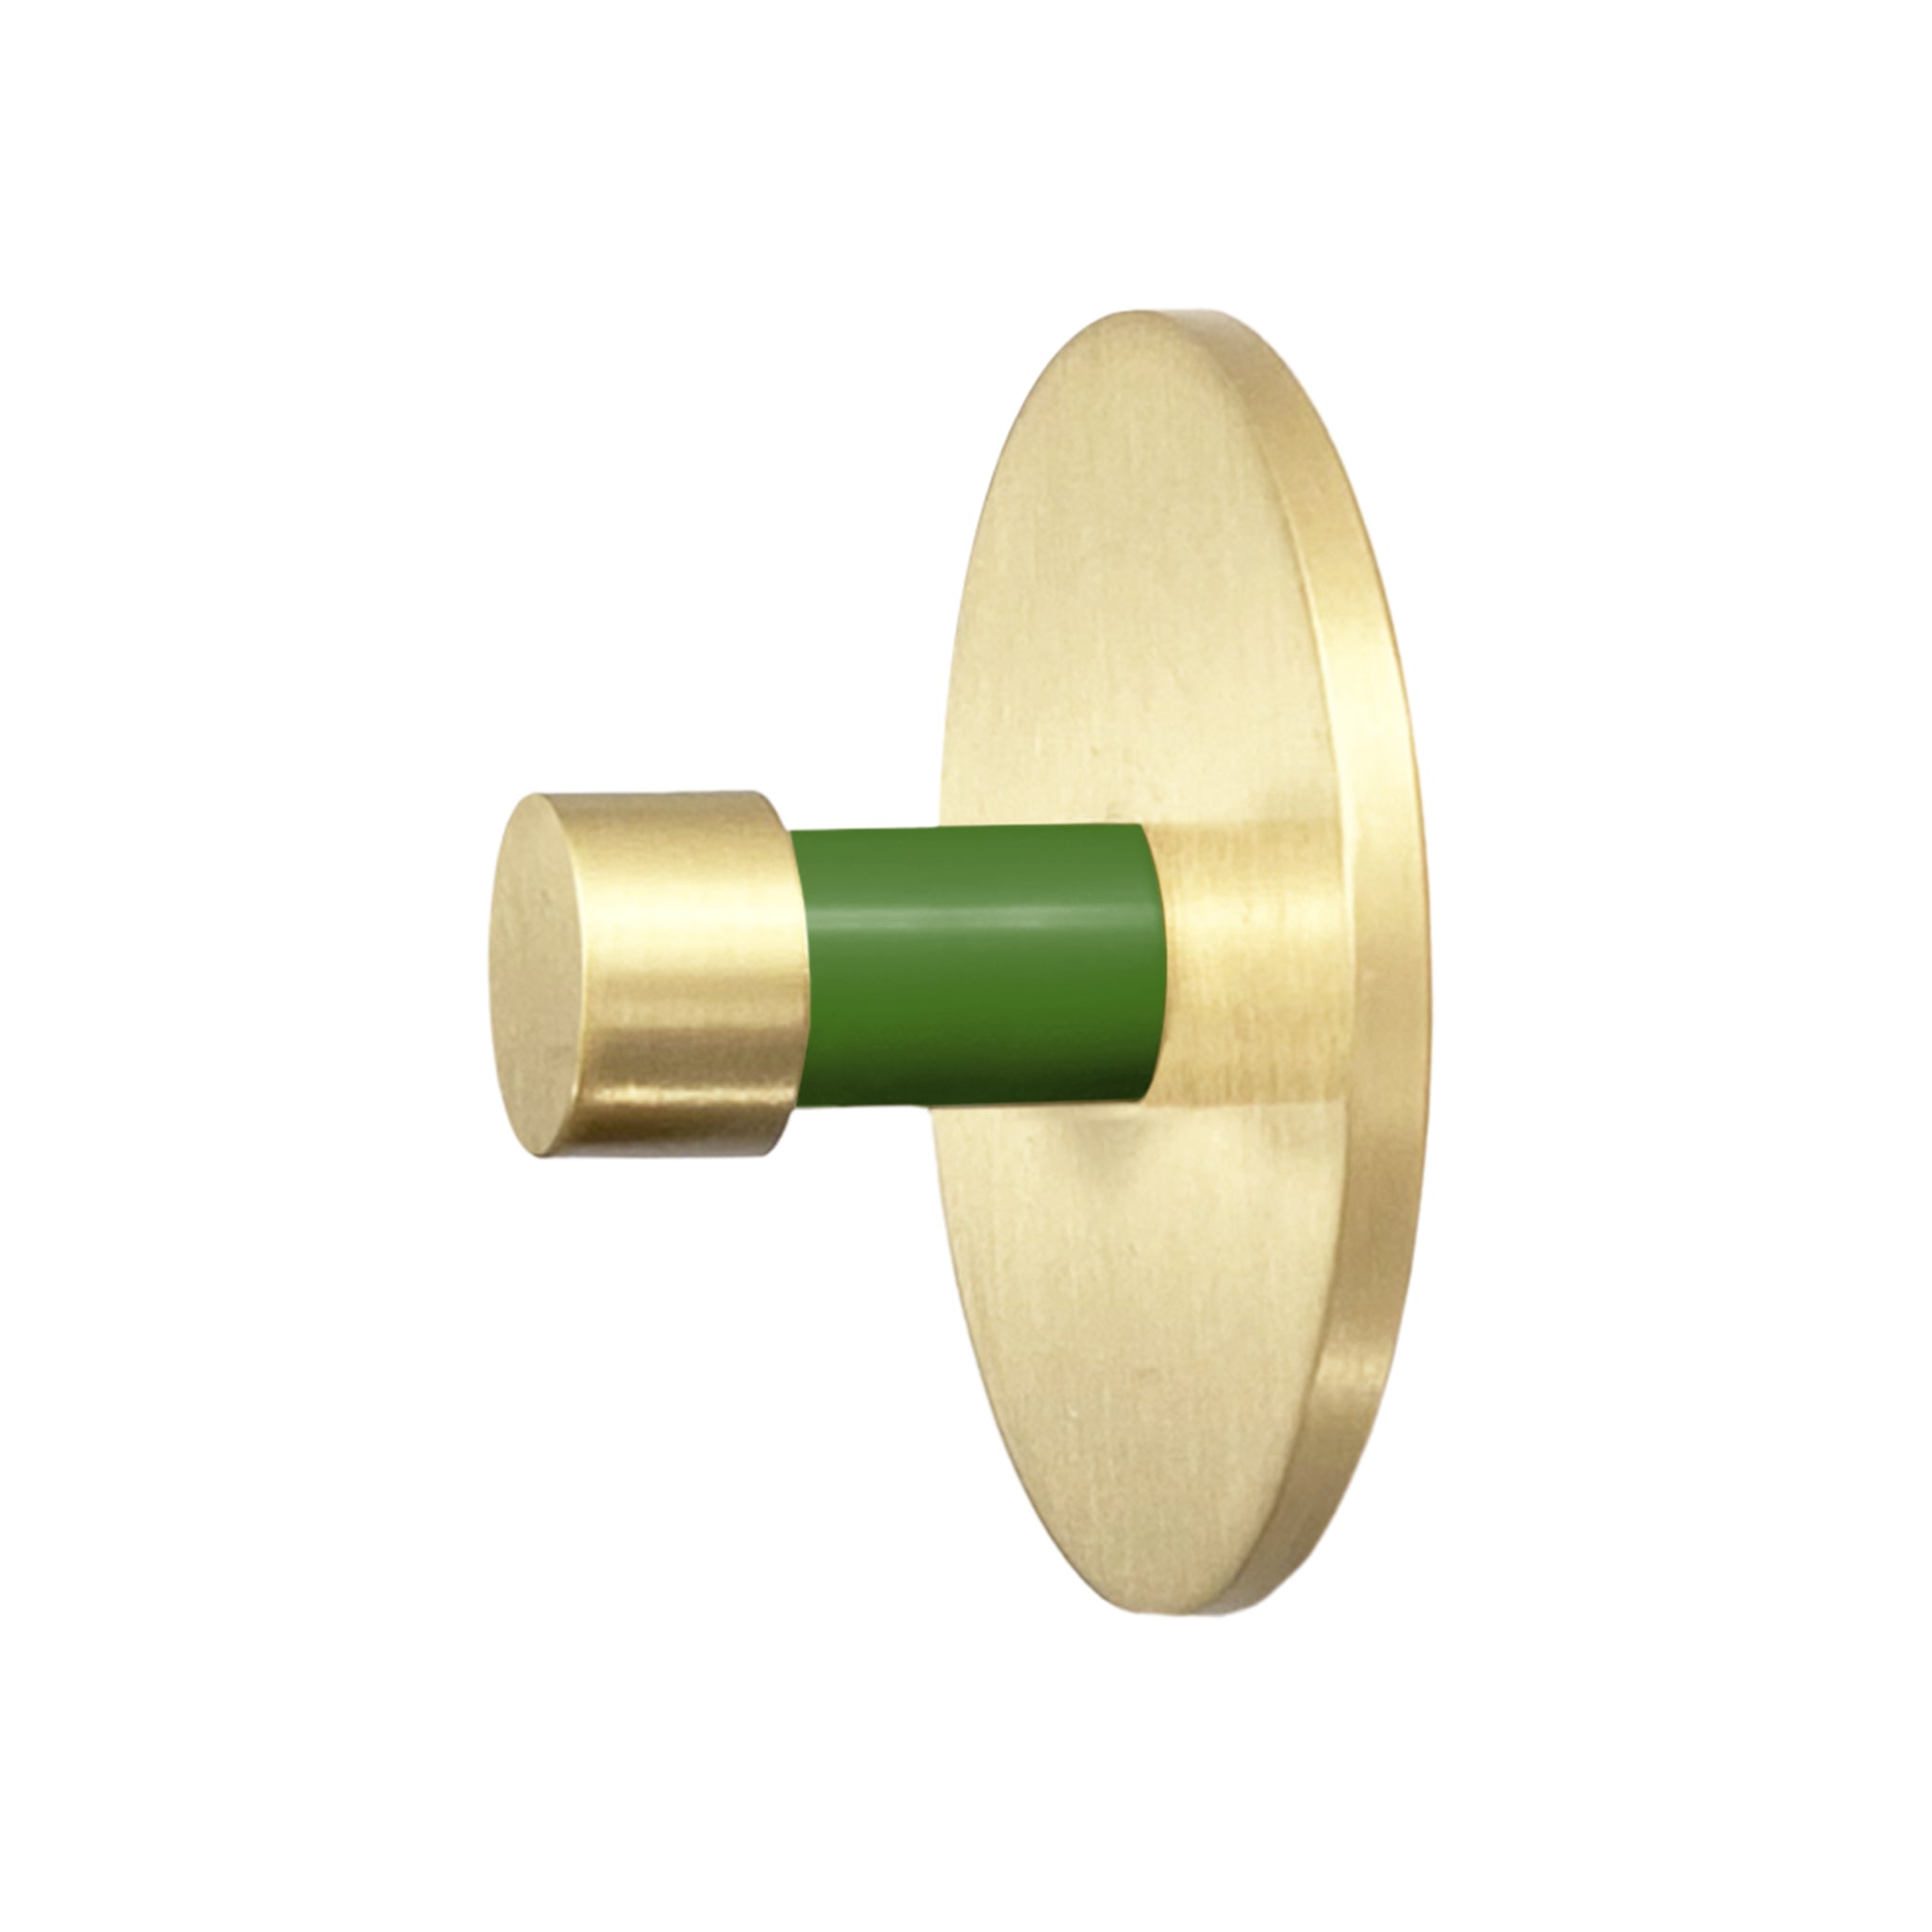 Brass and python green color Bae knob Dutton Brown hardware